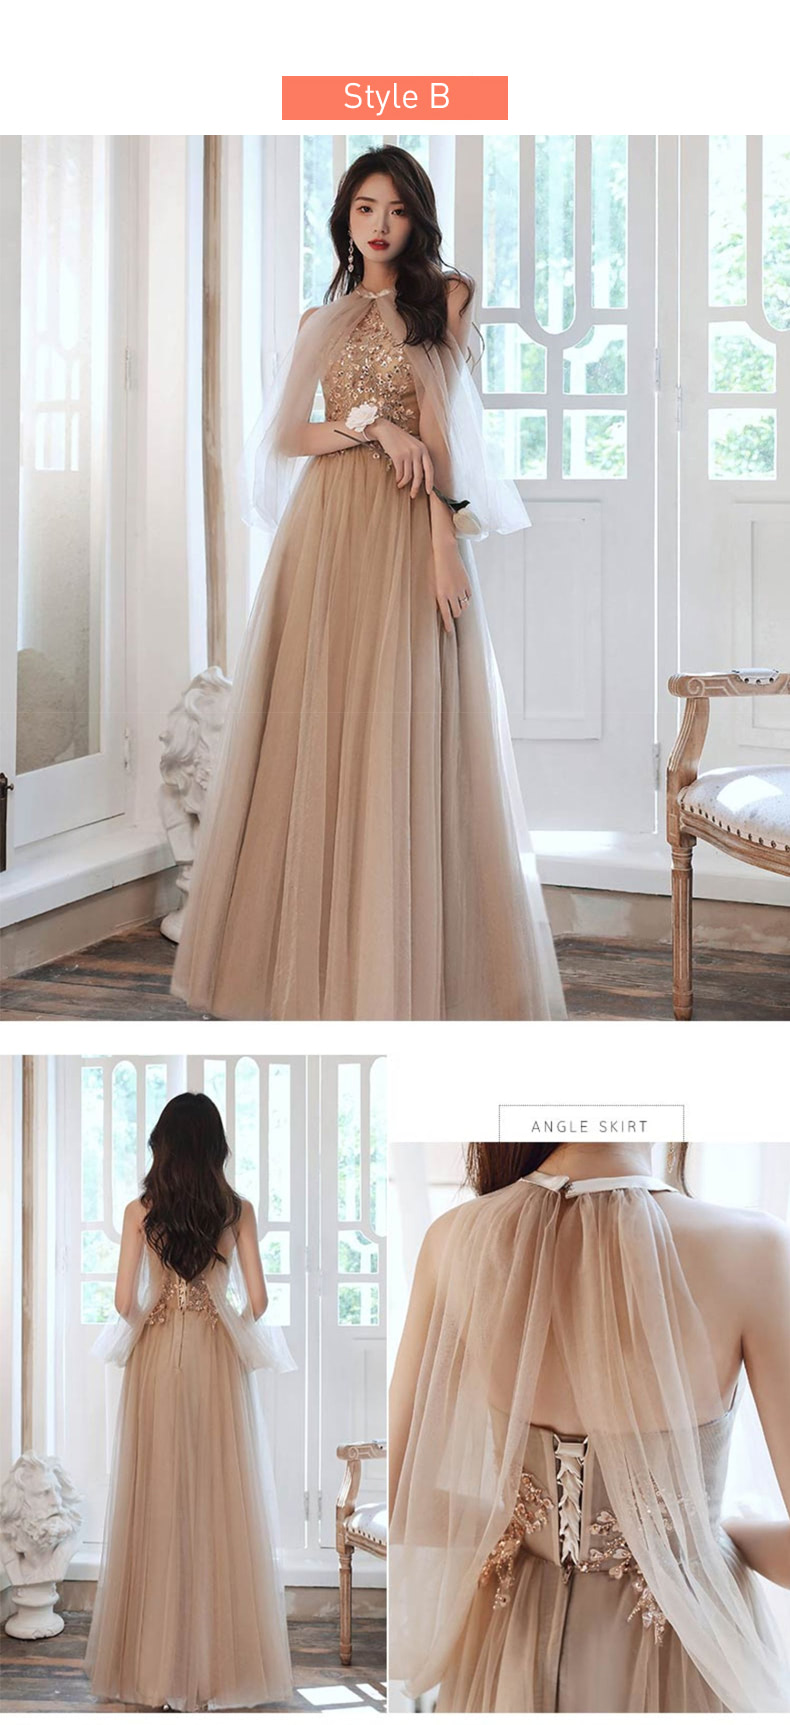 Charming-Embroidery-Ruffle-Lace-Long-Bridesmaid-Dress-Ball-Gown16.jpg